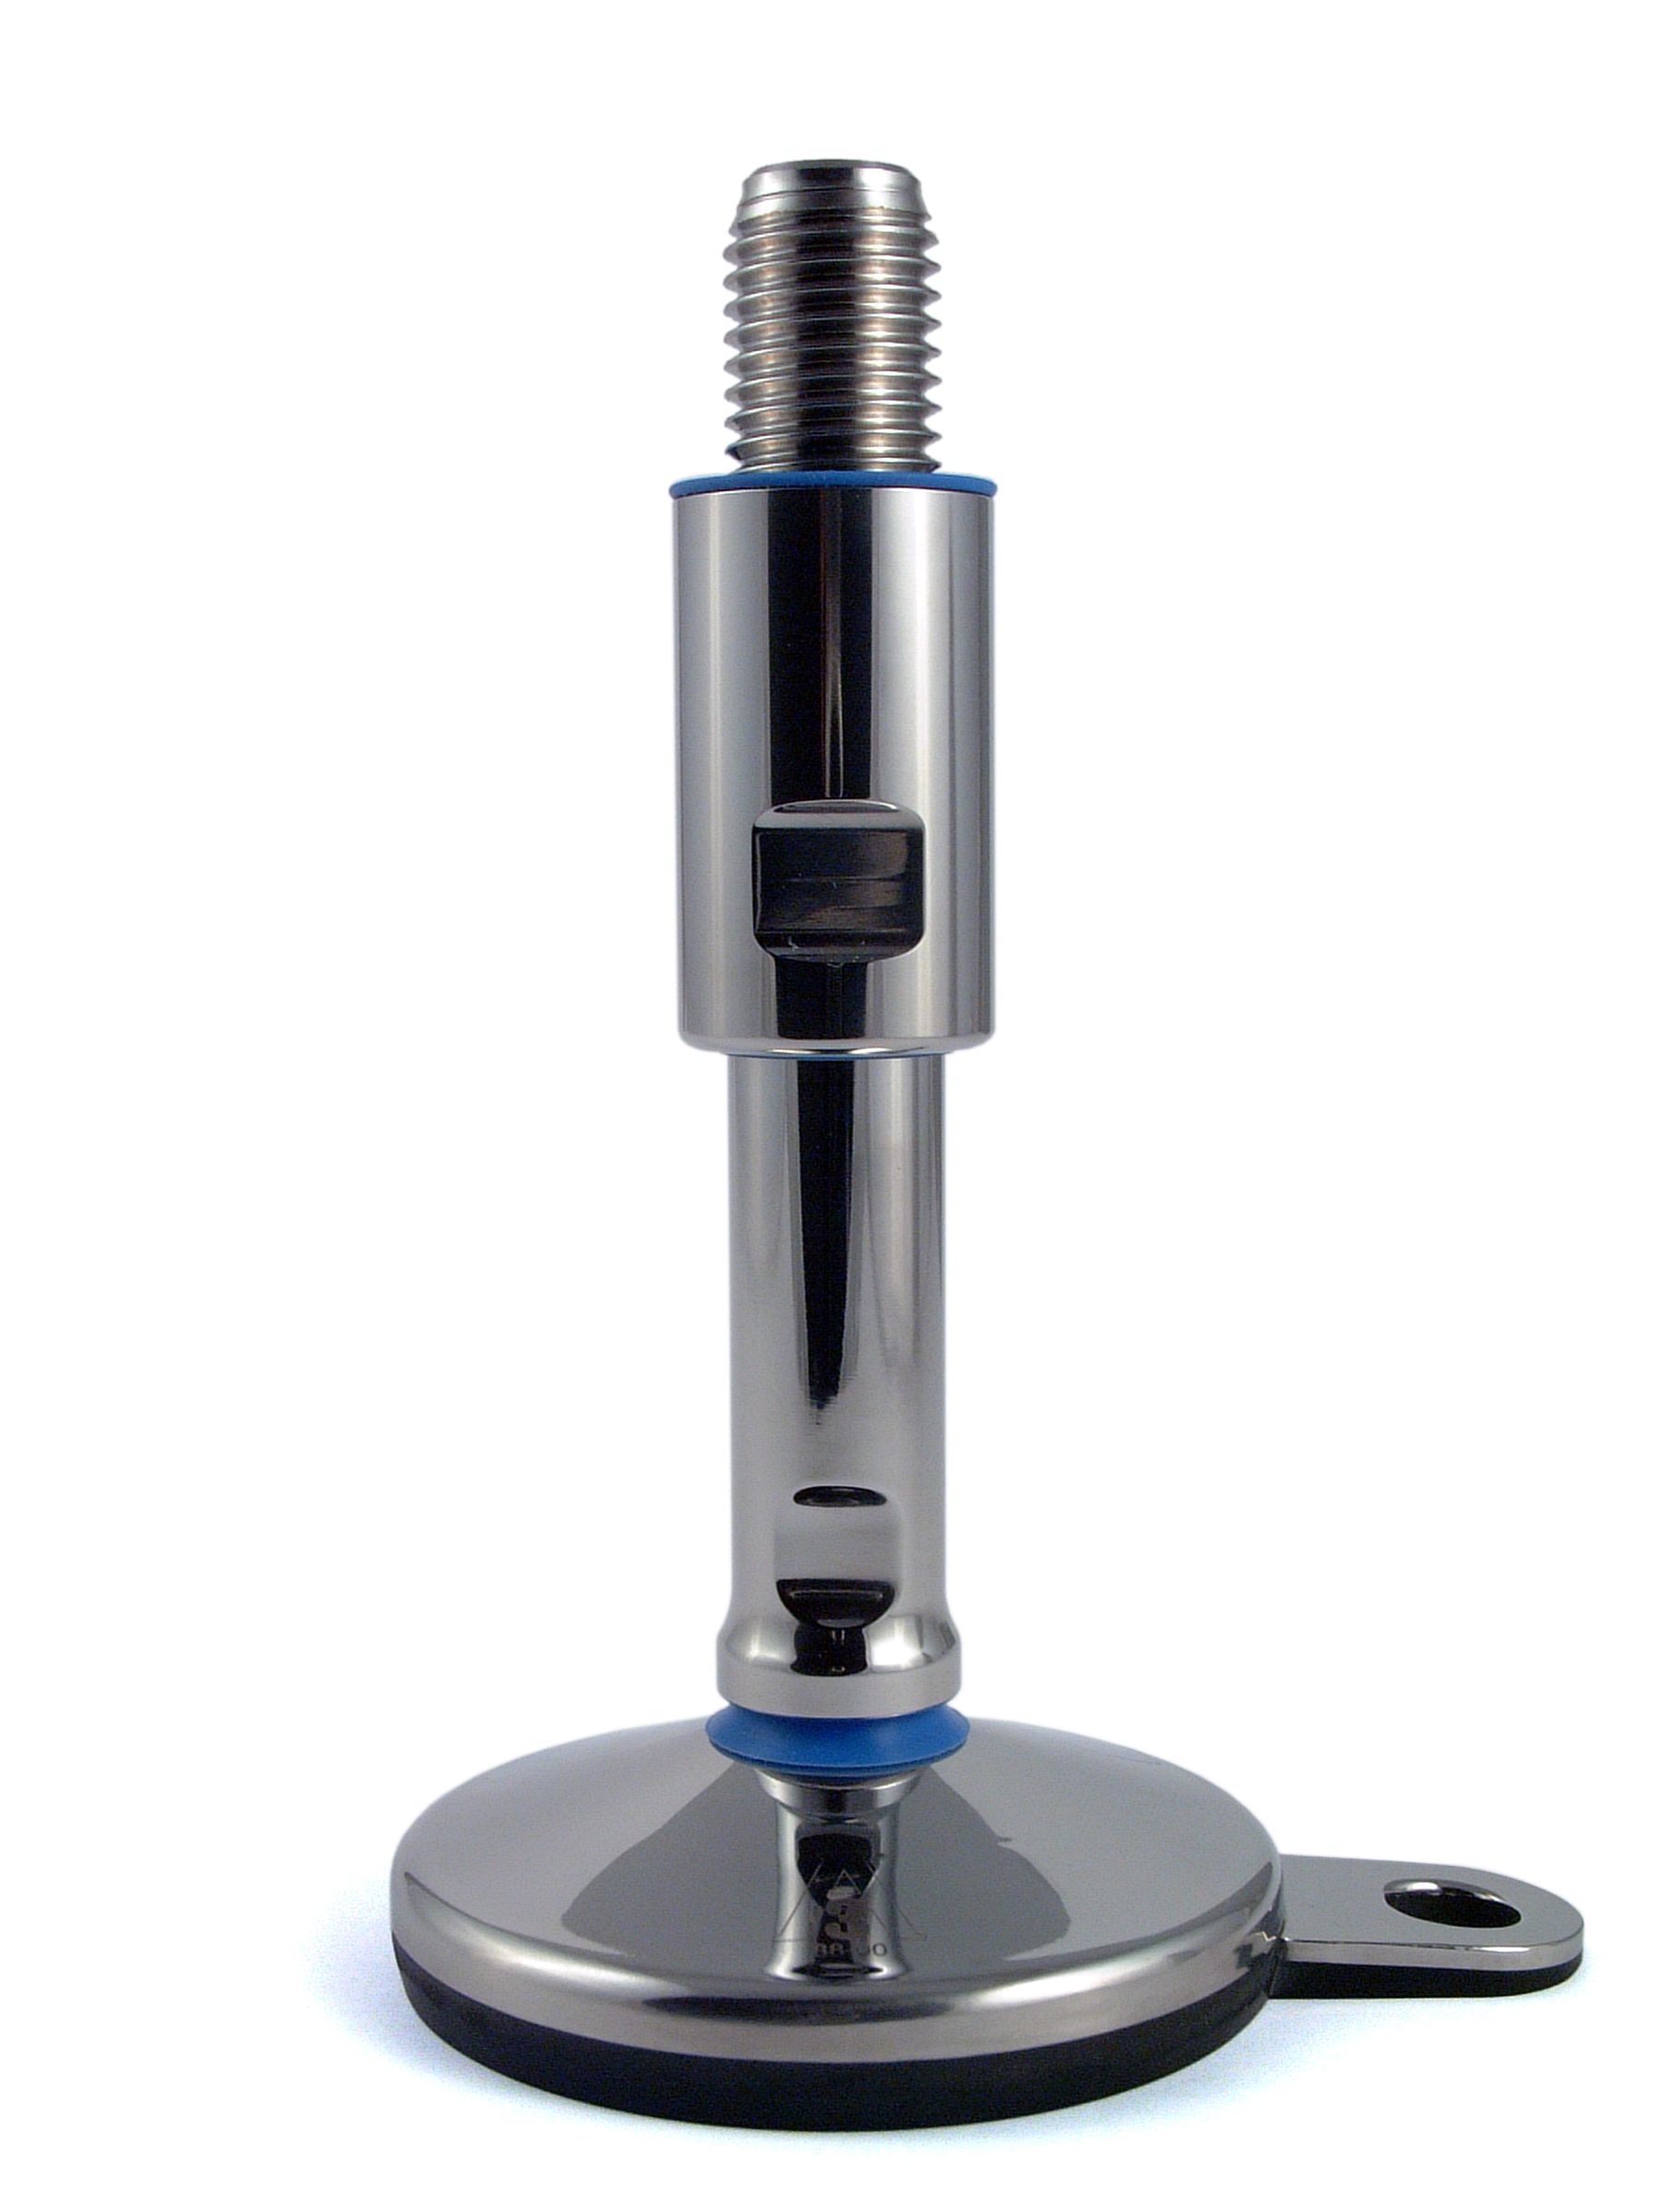 RS PRO M16 Stainless Steel Hygienic Adjustable Foot, 2000kg Static Load Capacity 15° Tilt Angle